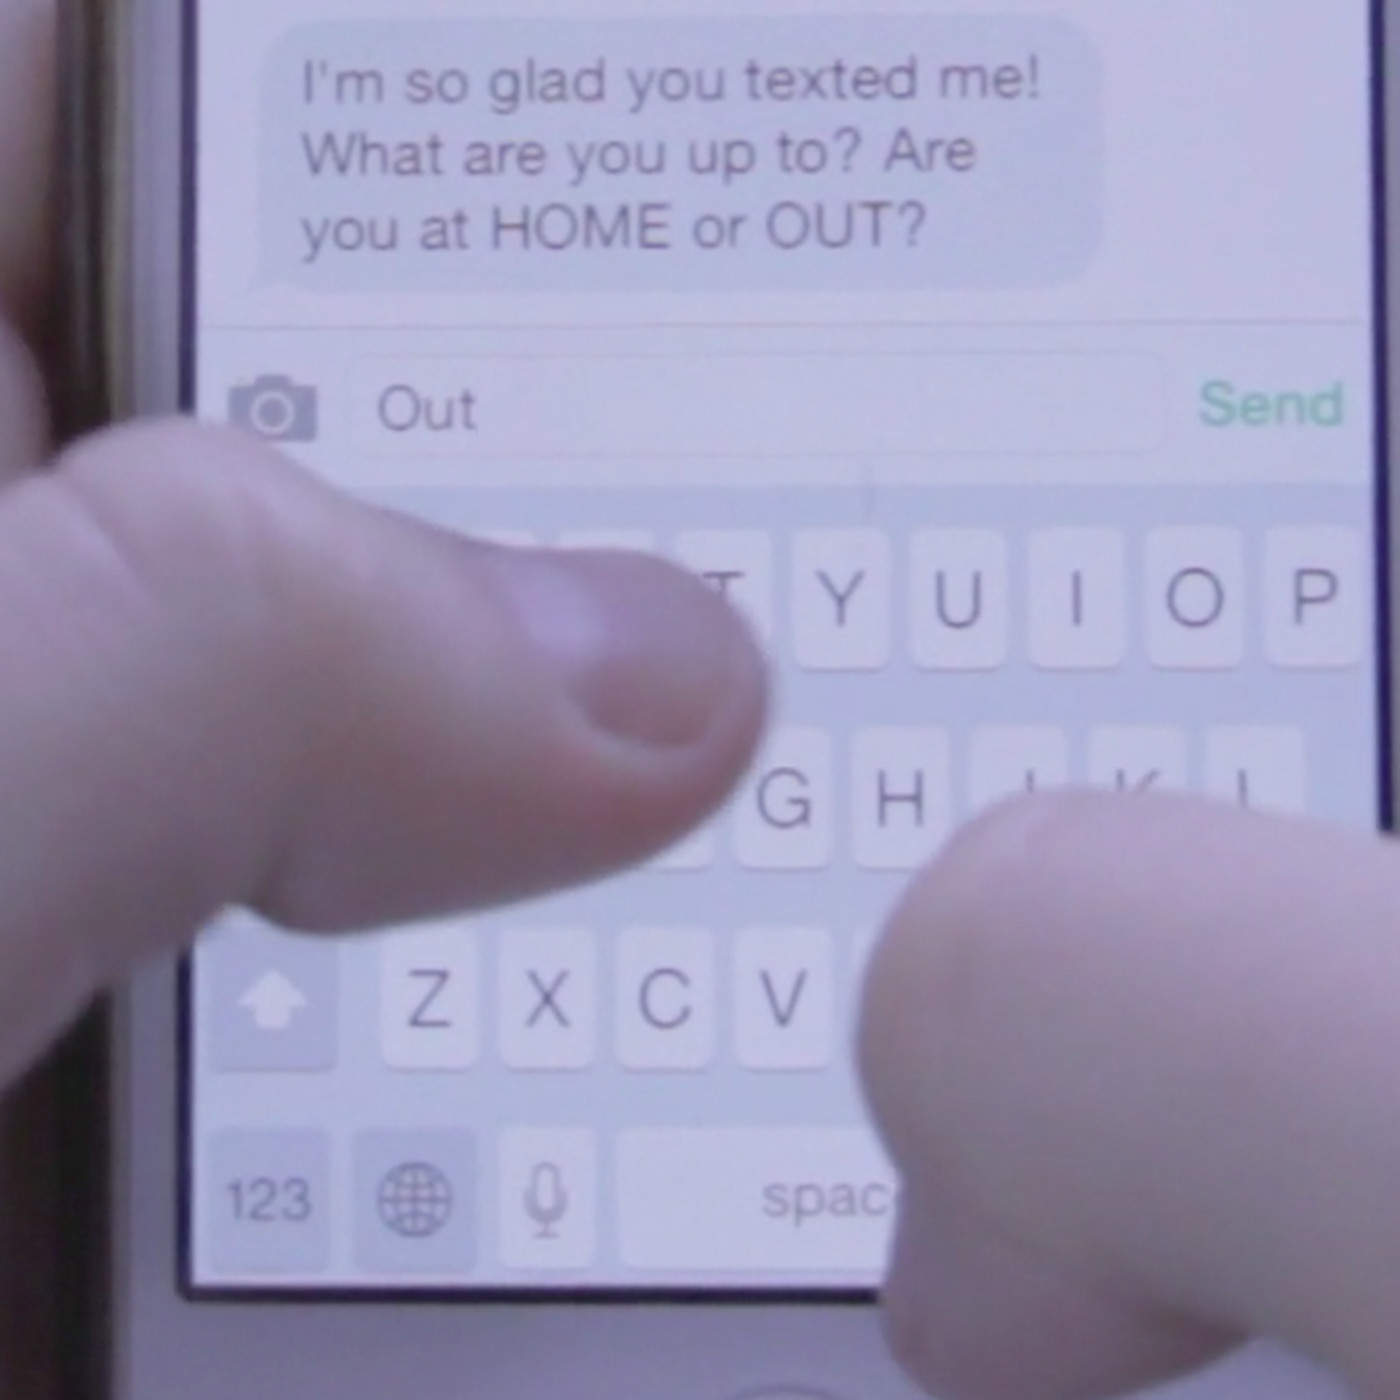 How to sext: 5 ways to master the art of sexting if you're apart right now